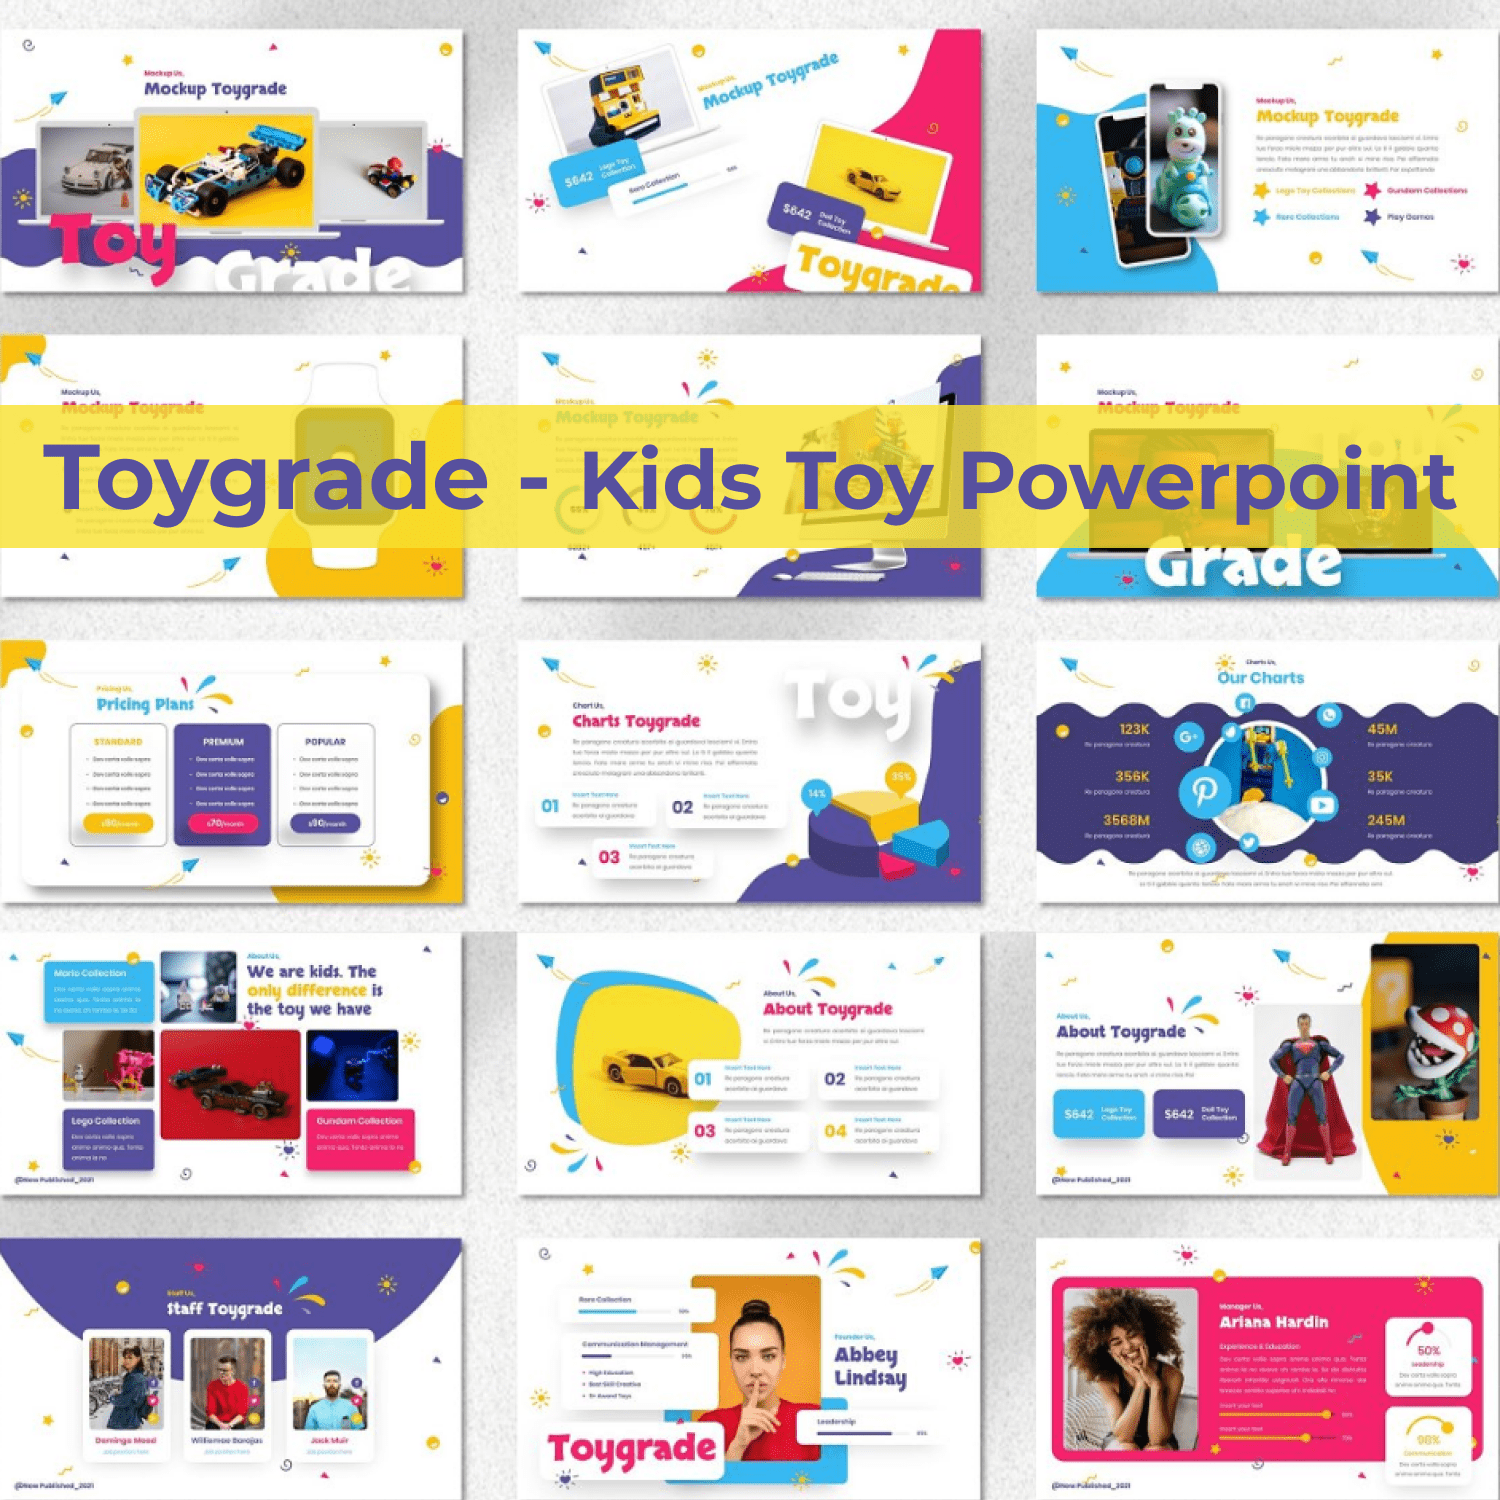 Toygrade - Kids Toy Powerpoint cover image.